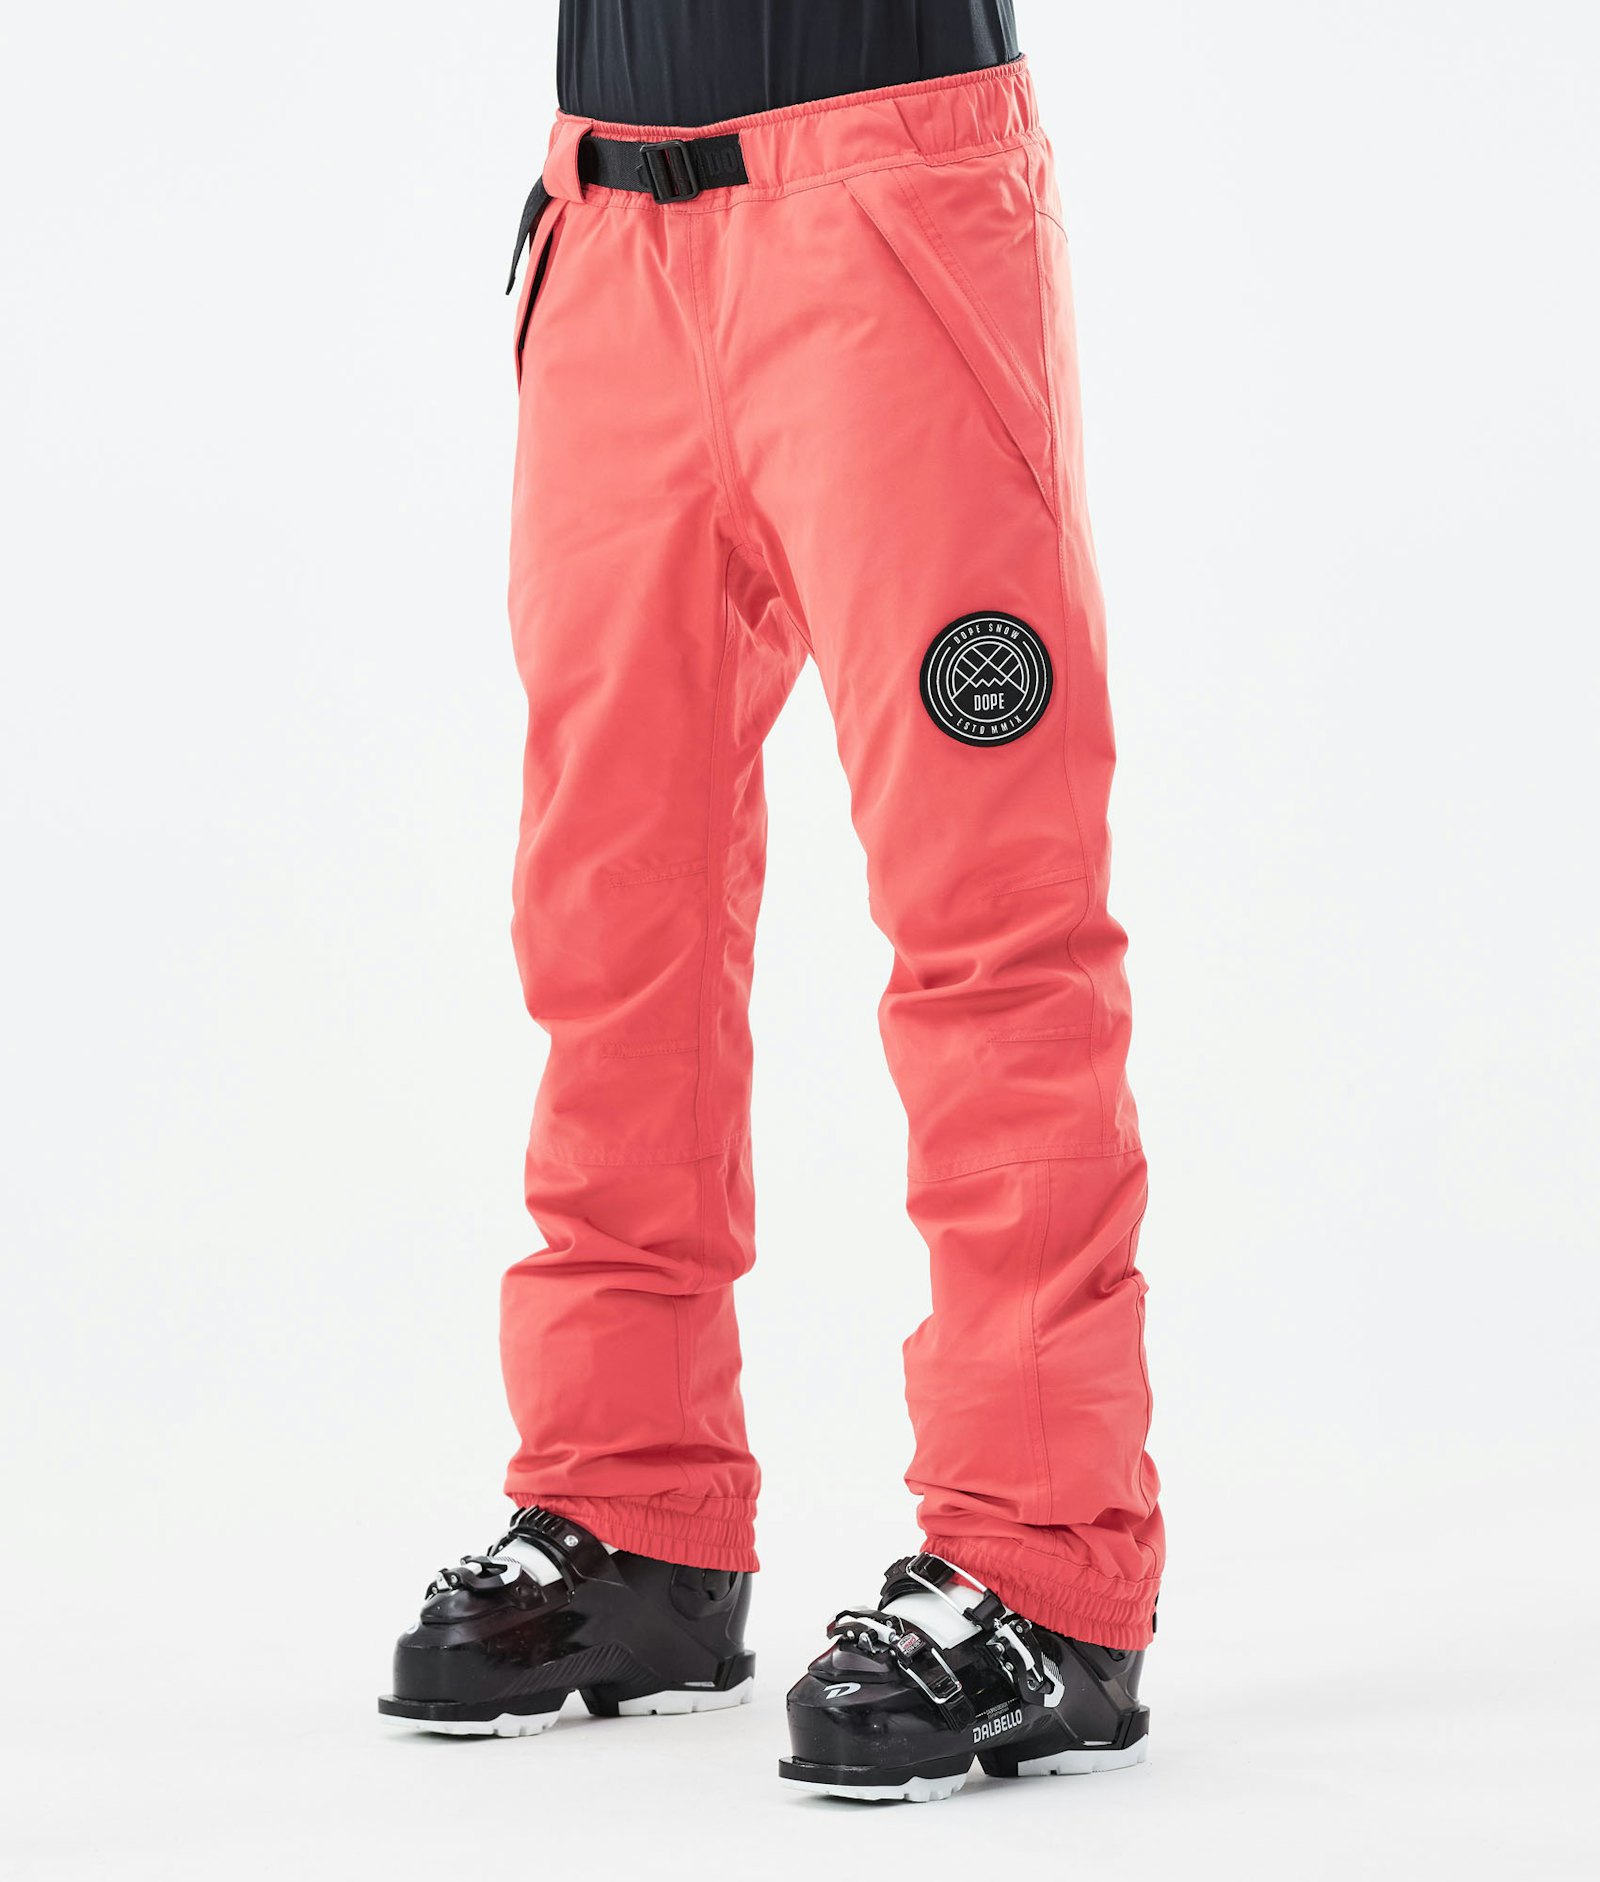 Dope Blizzard W 2021 Pantalones Esquí Mujer Coral